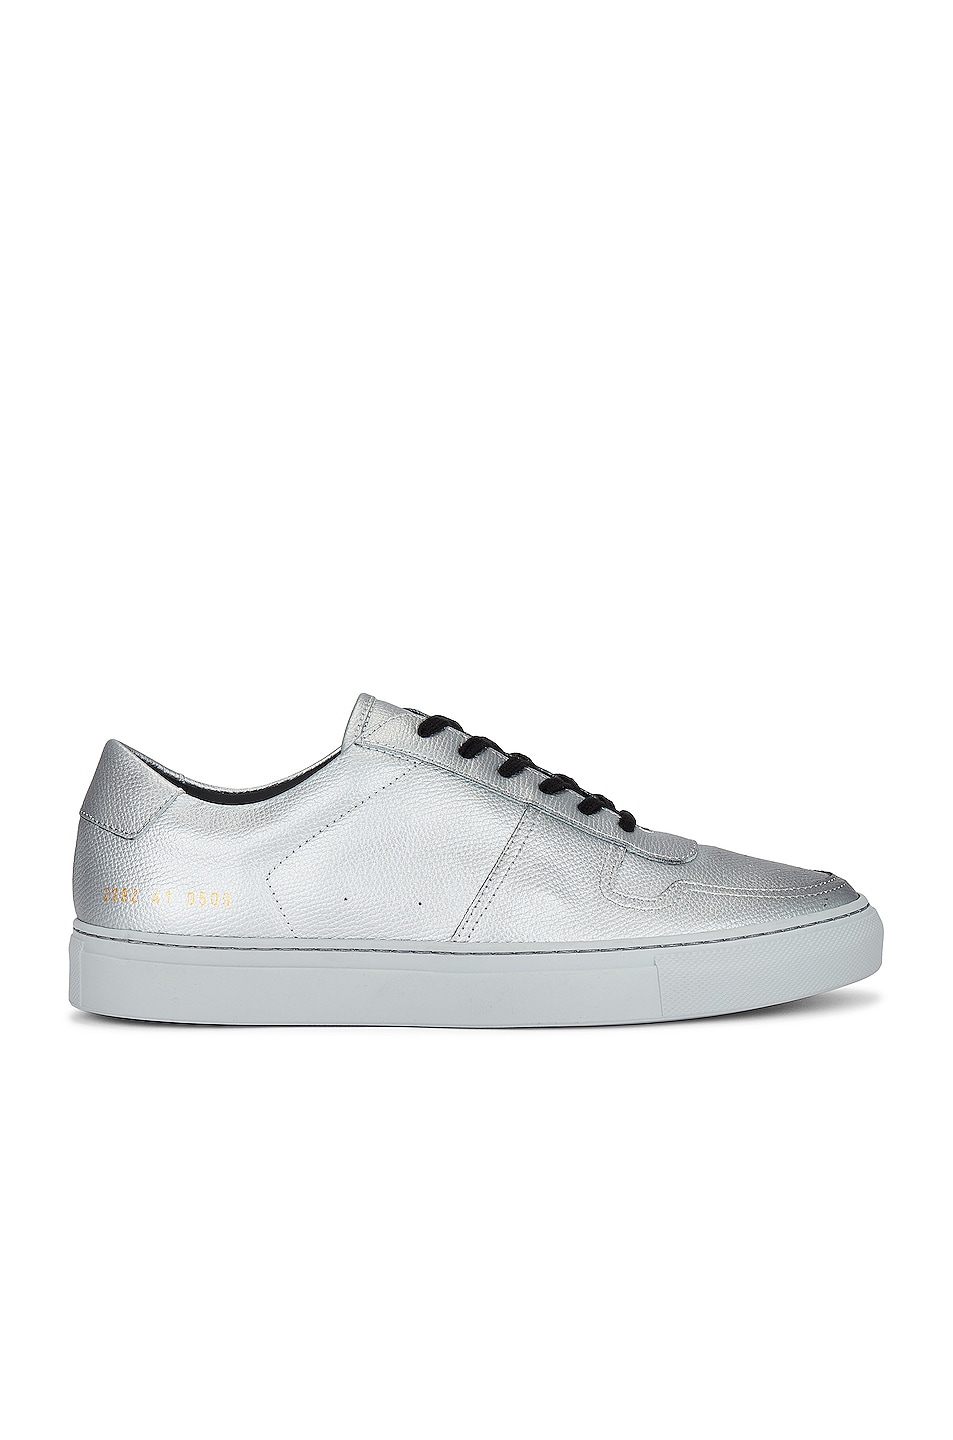 Image 1 of Common Projects Bball Classic Sneaker in Silver